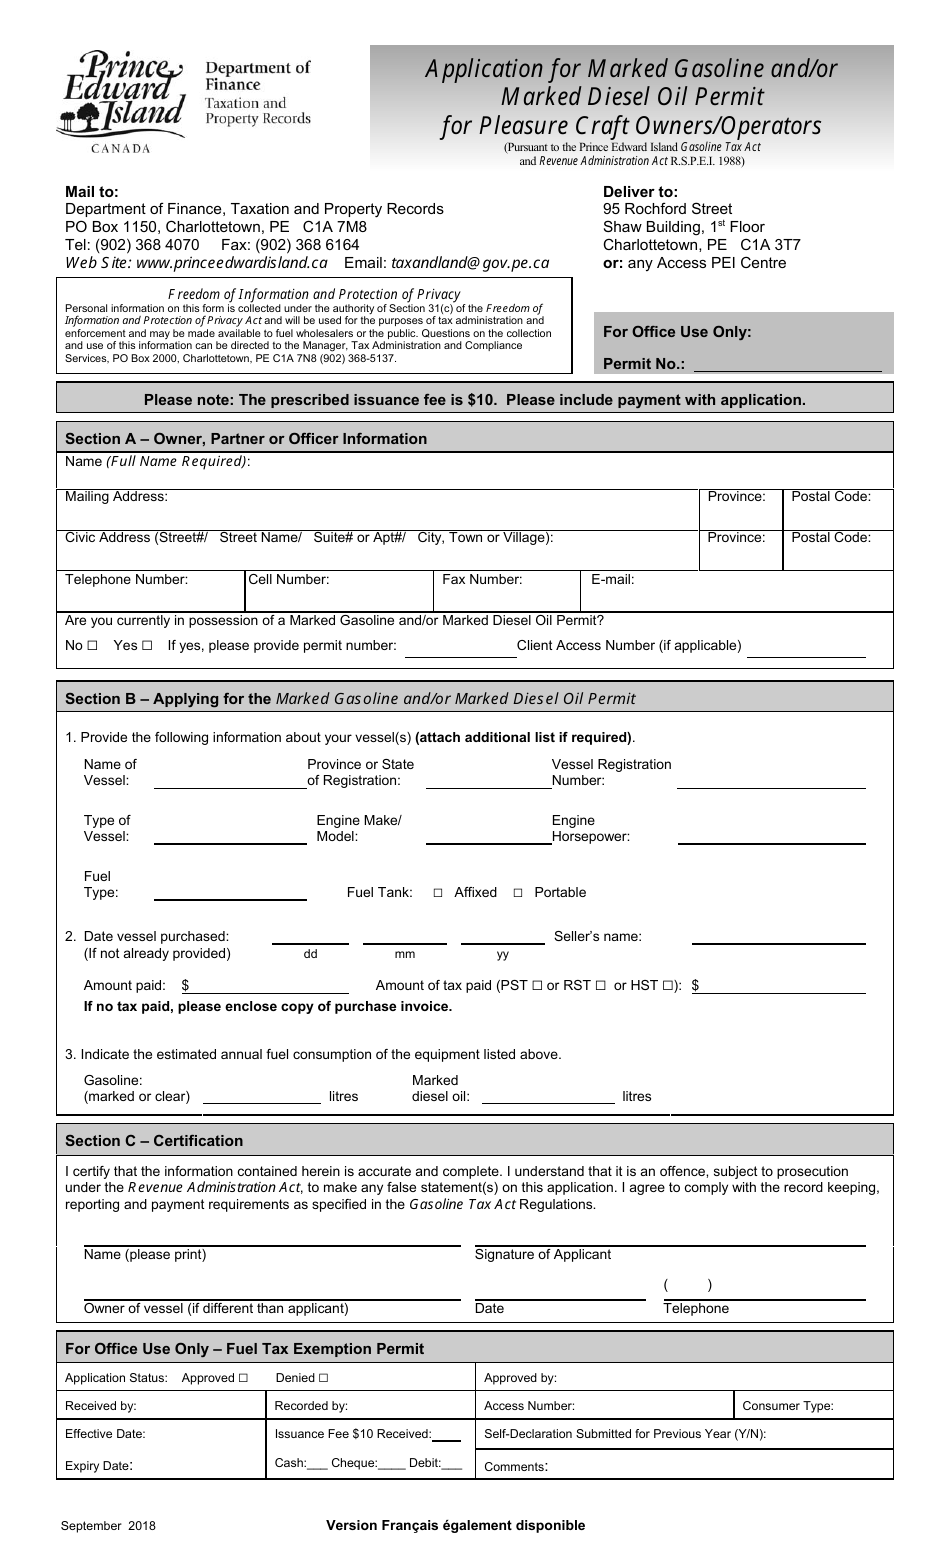 Application for Marked Gasoline and / or Marked Diesel Oil Permit for Pleasure Craft Owners / Operators - Prince Edward Island, Canada, Page 1